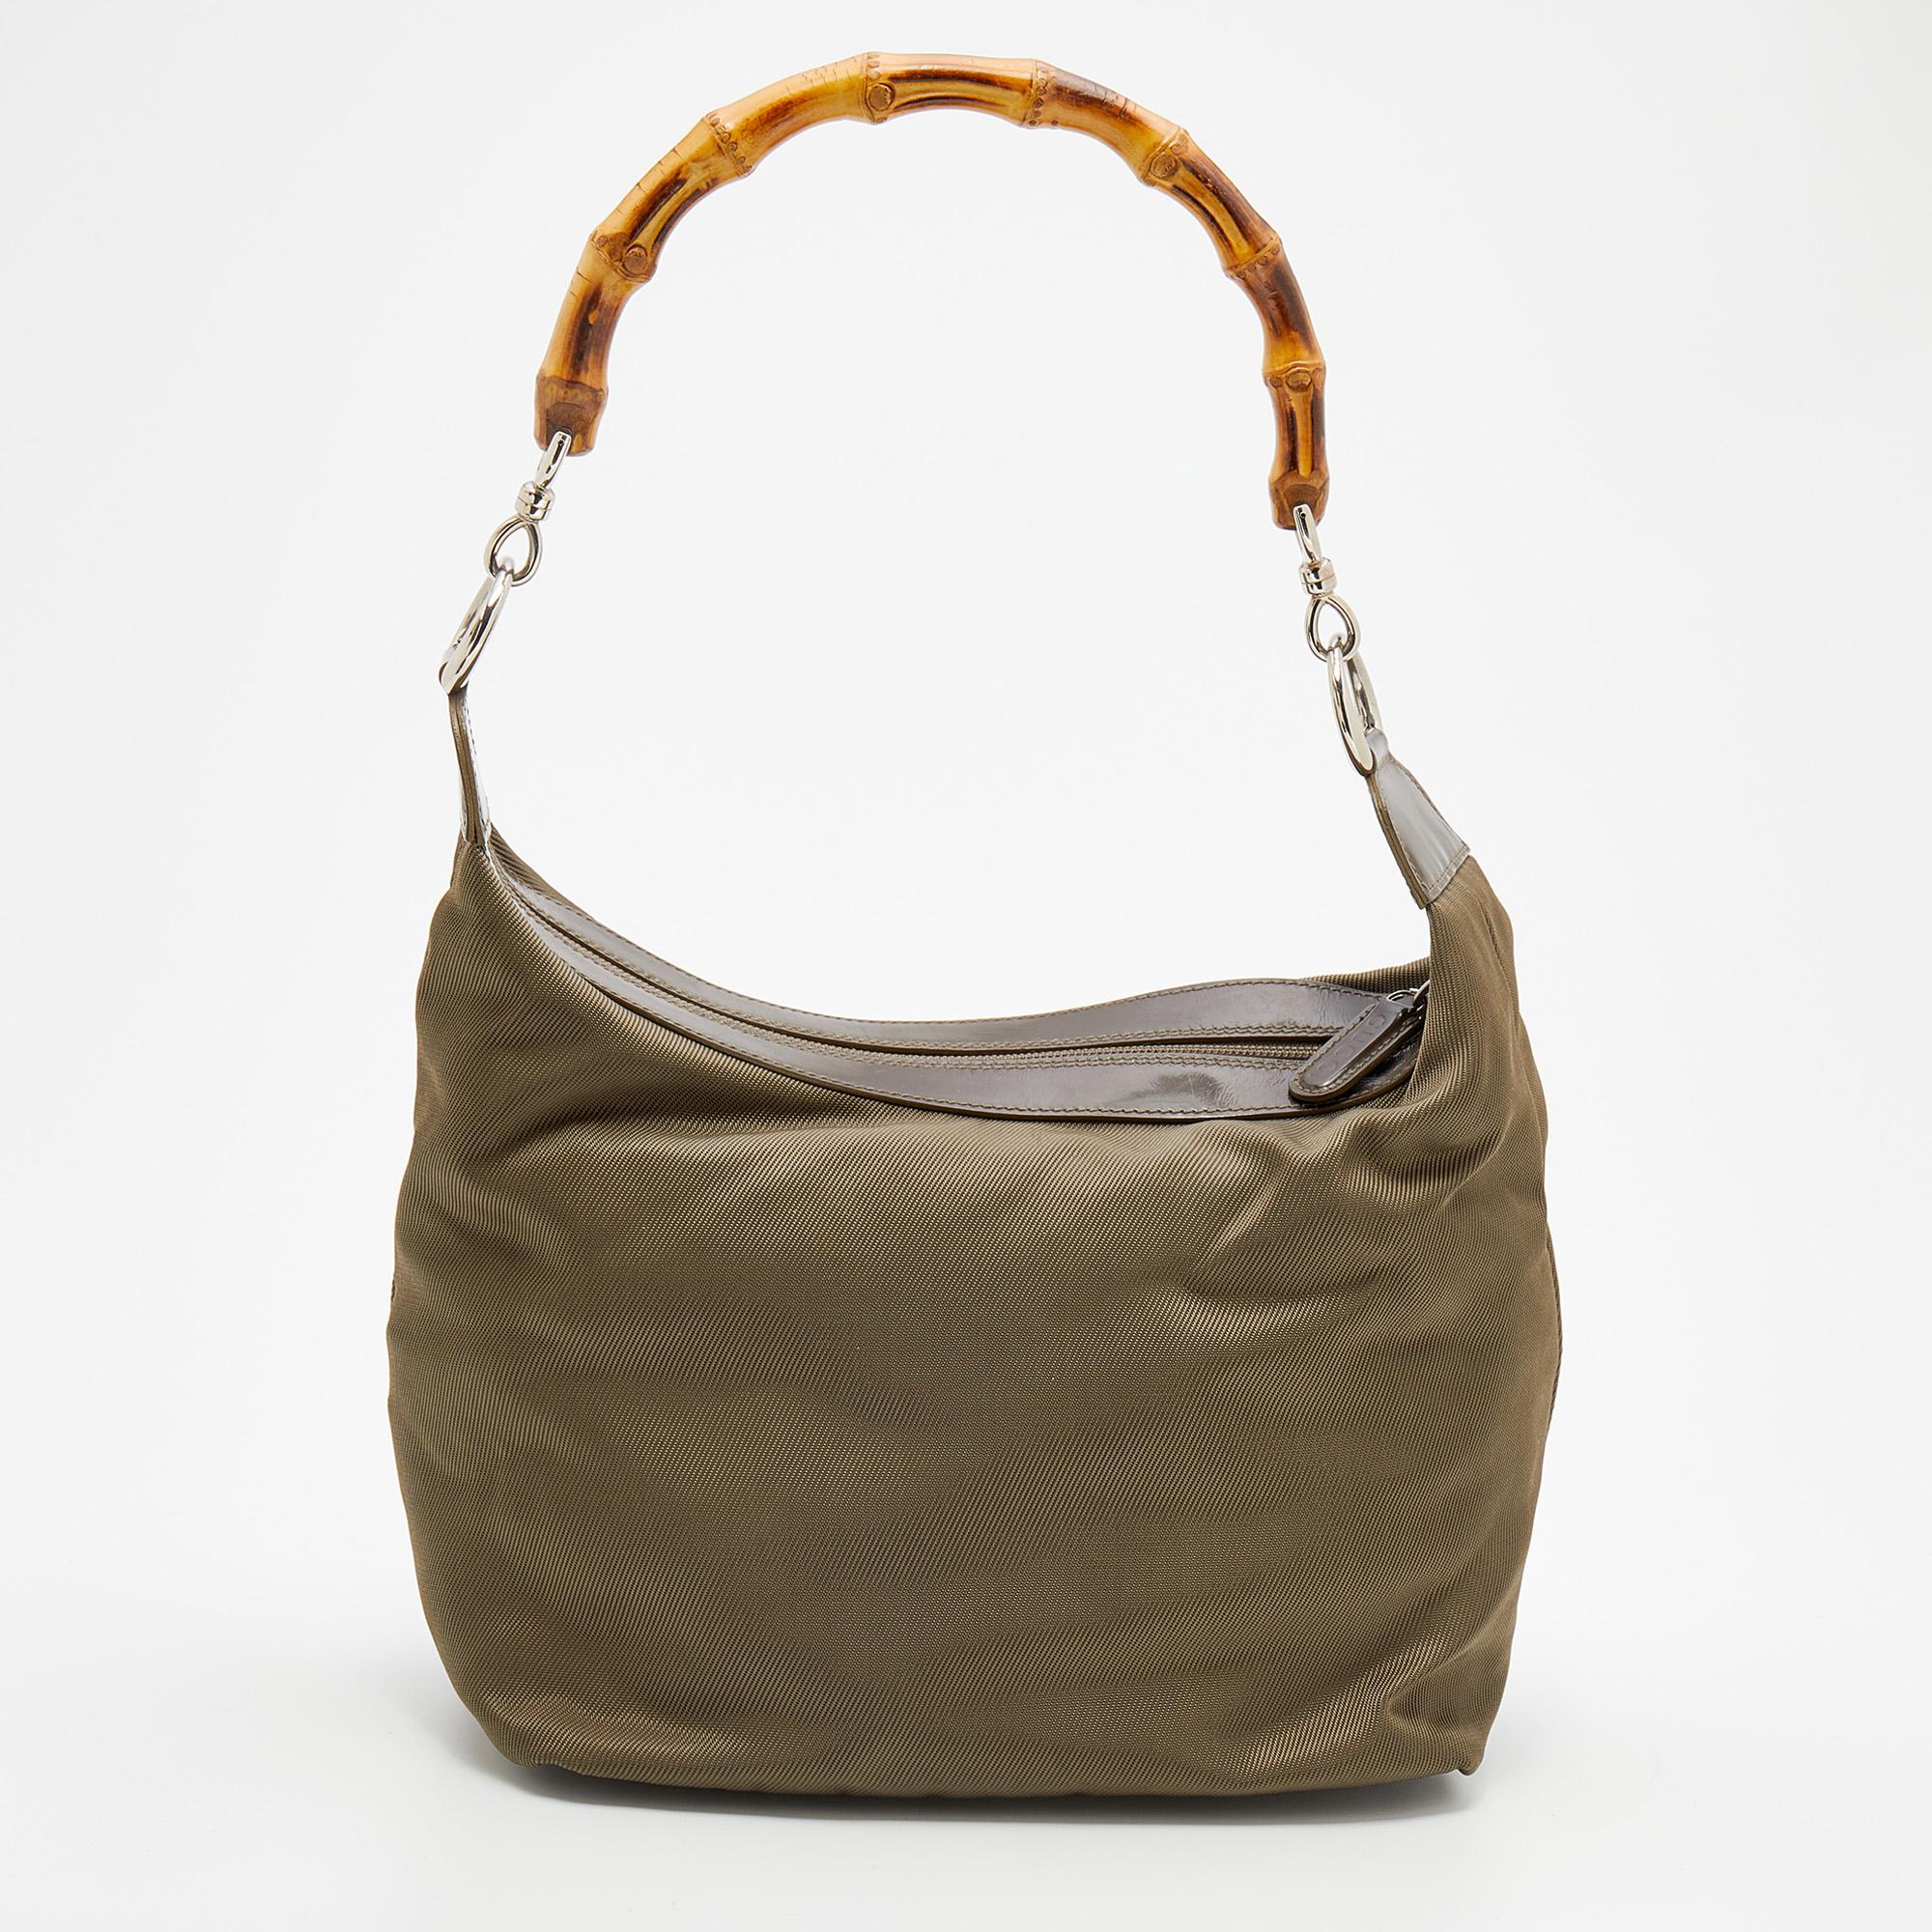 Spacious and captivating, this Peggy Bamboo hobo comes from the House of Gucci. It has been crafted from olive-green canvas and patent leather on the exterior. It features a single Bamboo-detailed handle, silver-tone hardware, and a fabric-lined